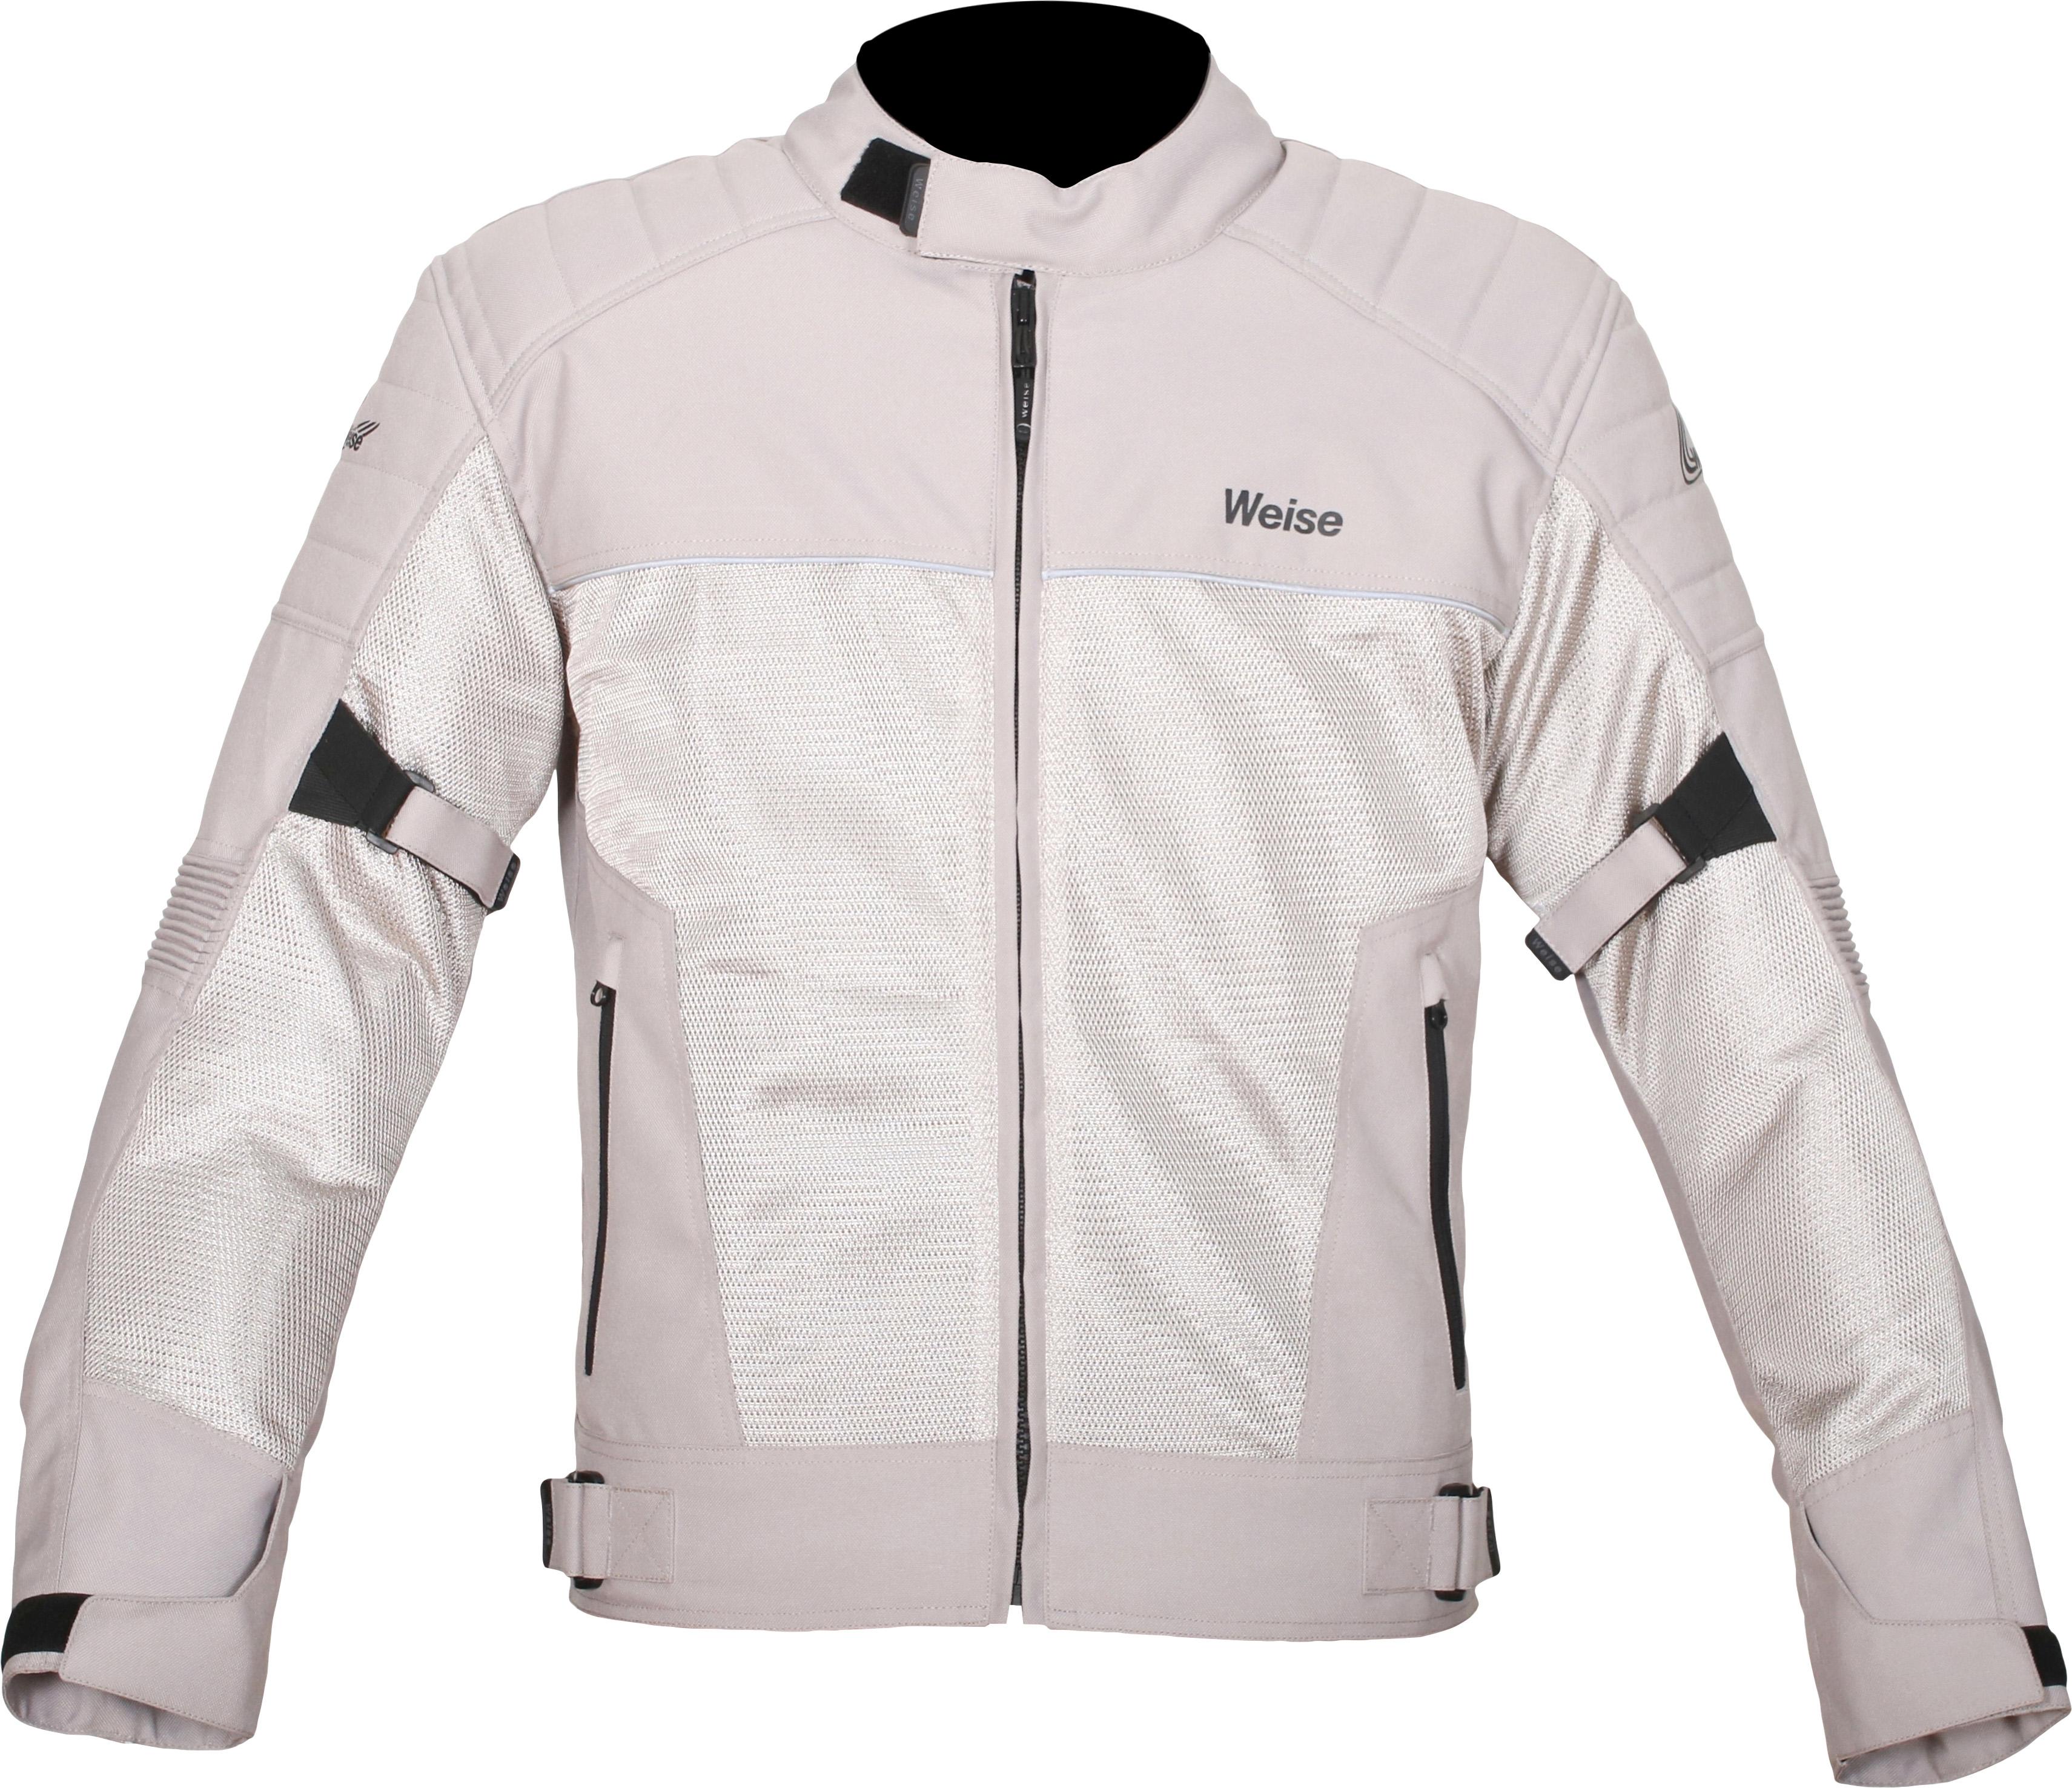 Weise Scout Motorcycle Jacket - Stone, 3Xl